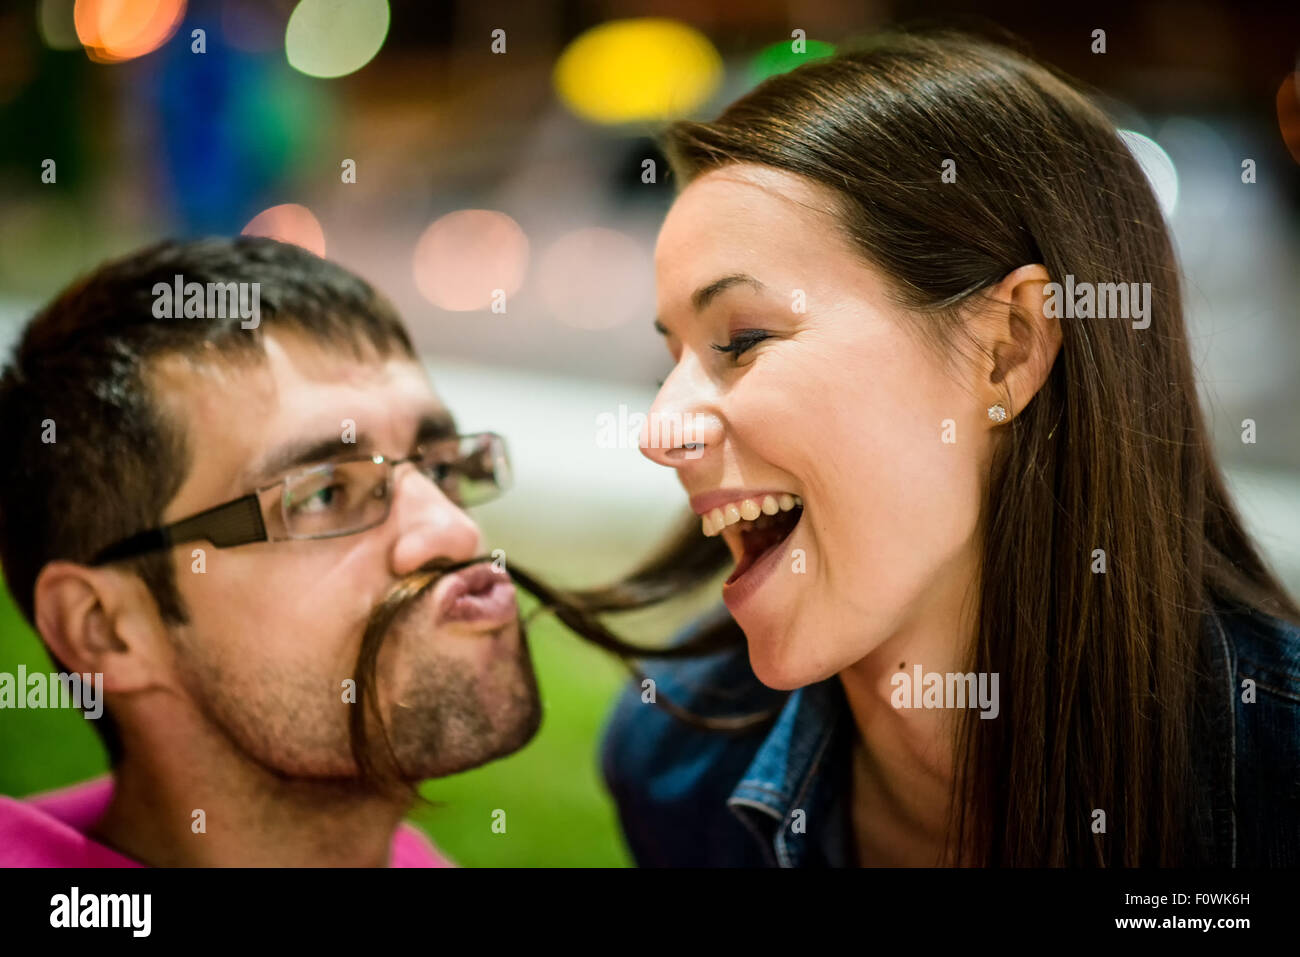 Couple having fun in street at night - man making moustache with his hair Stock Photo